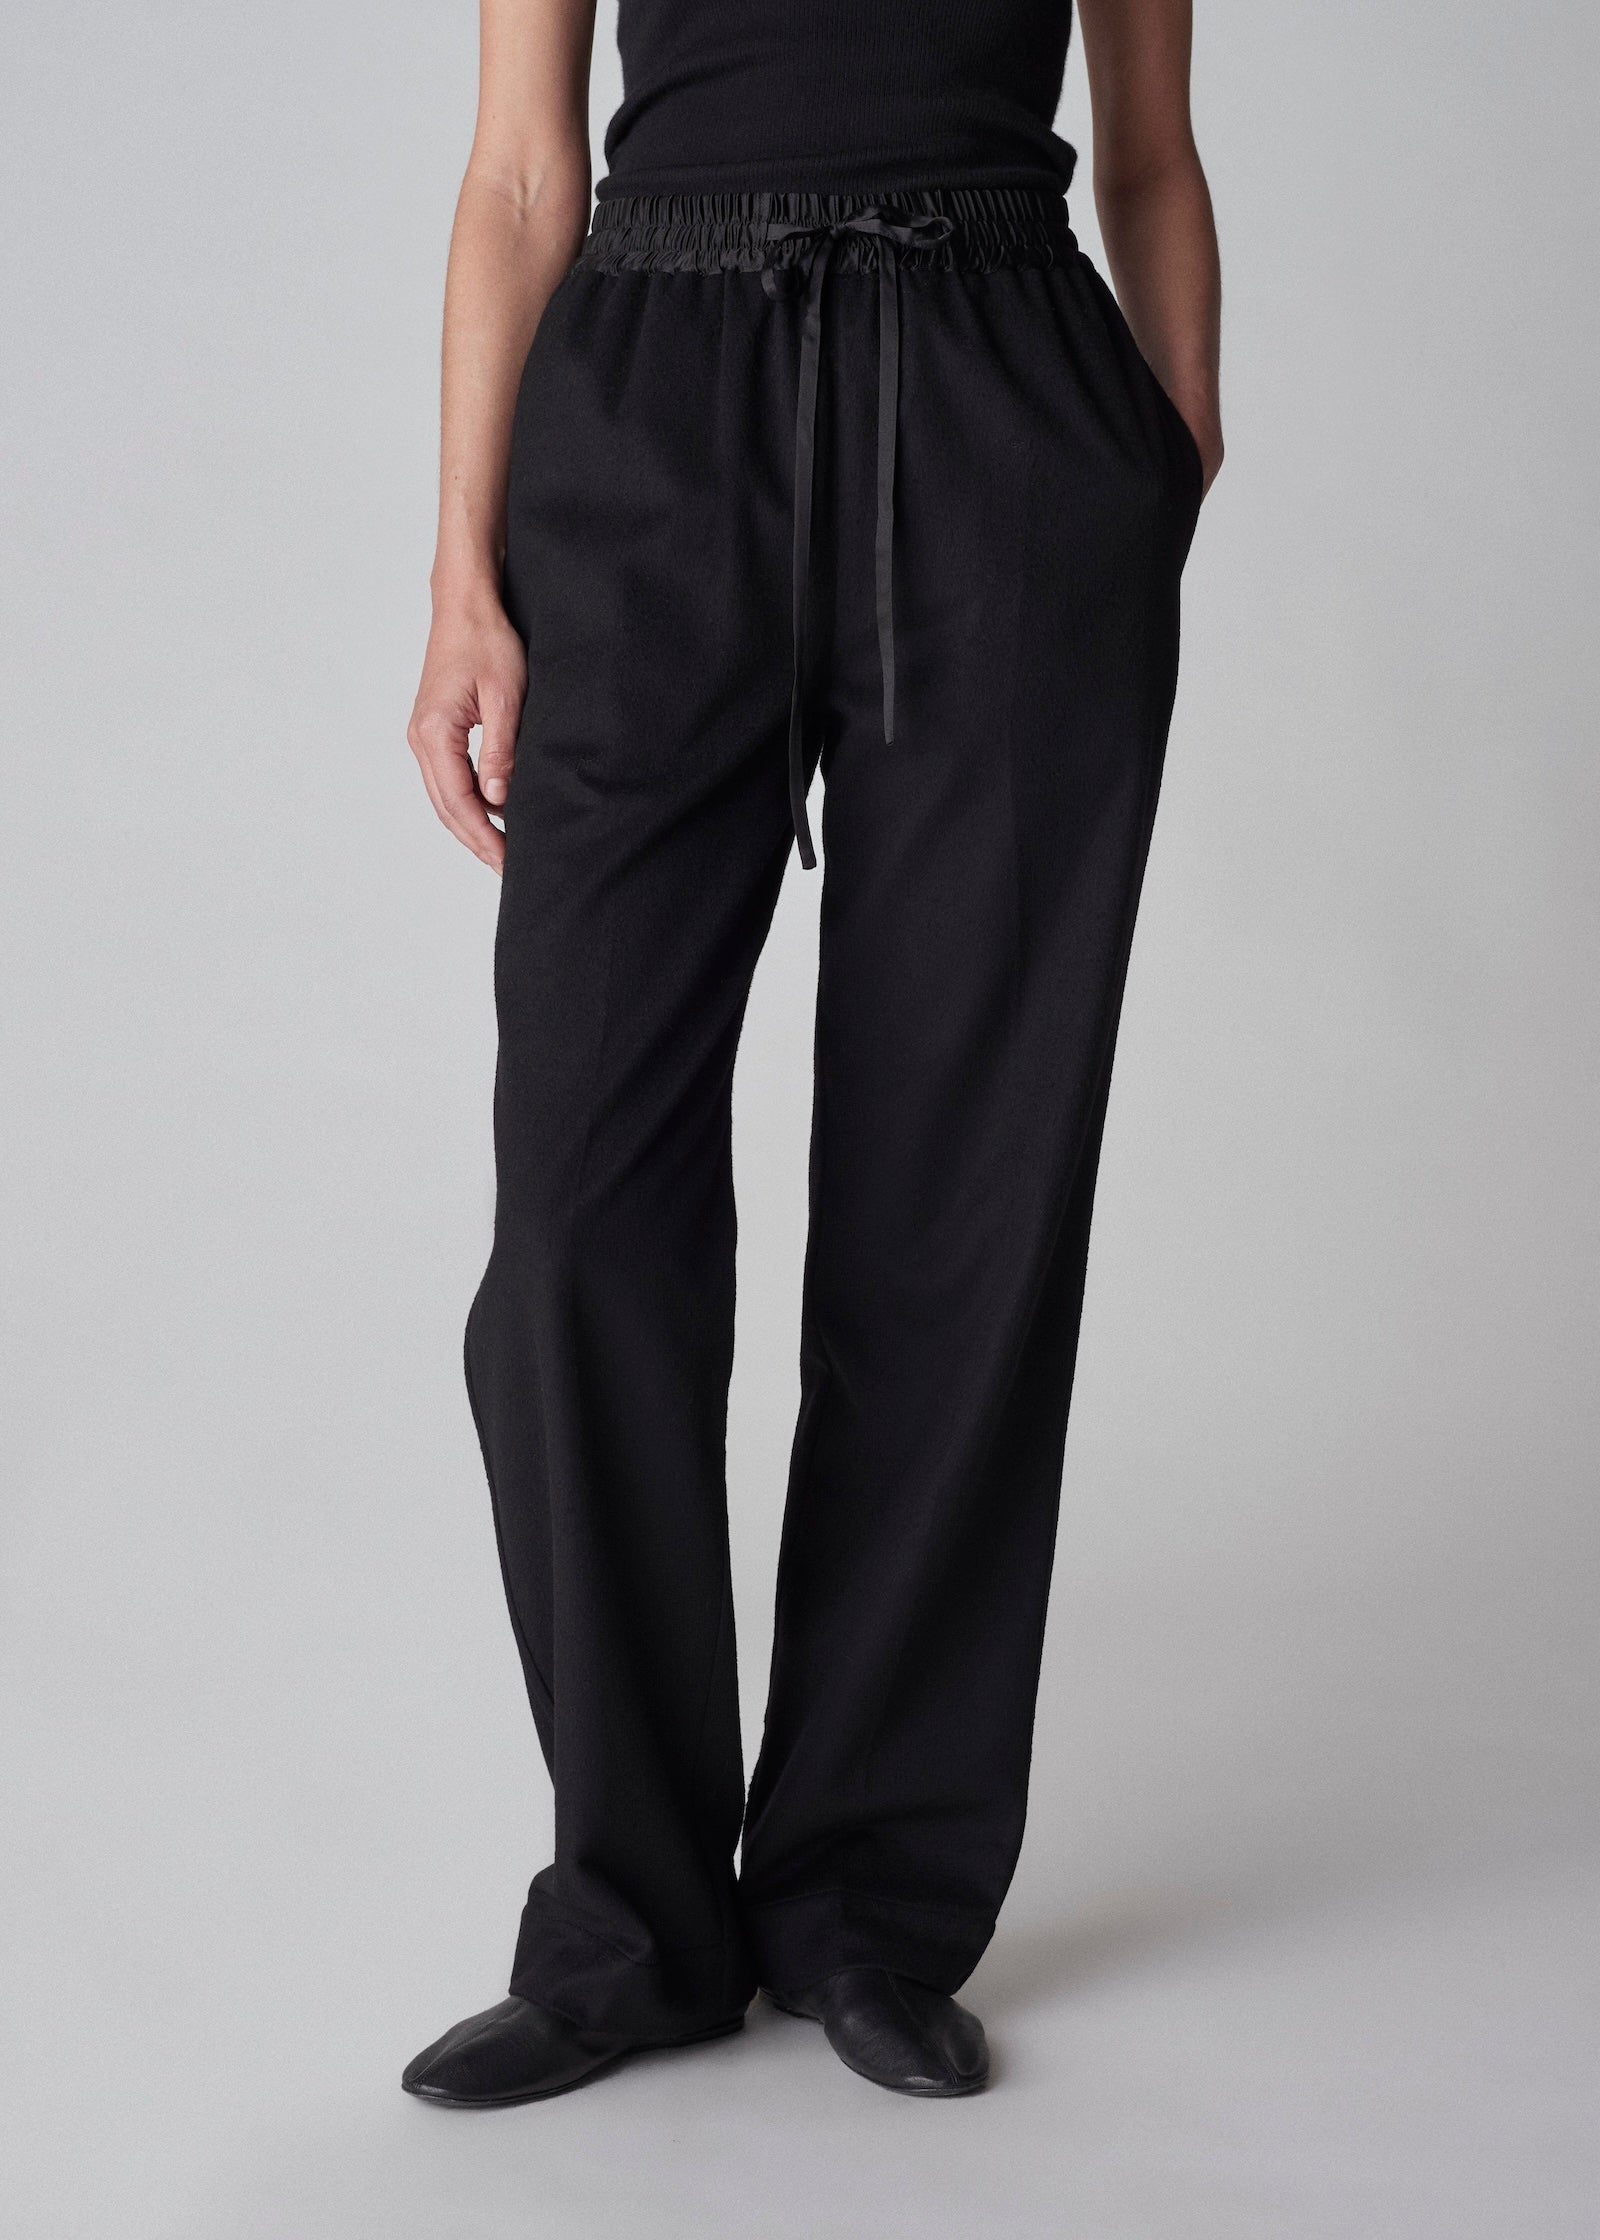 Jogger Pant in Flannel - Black - CO Collections